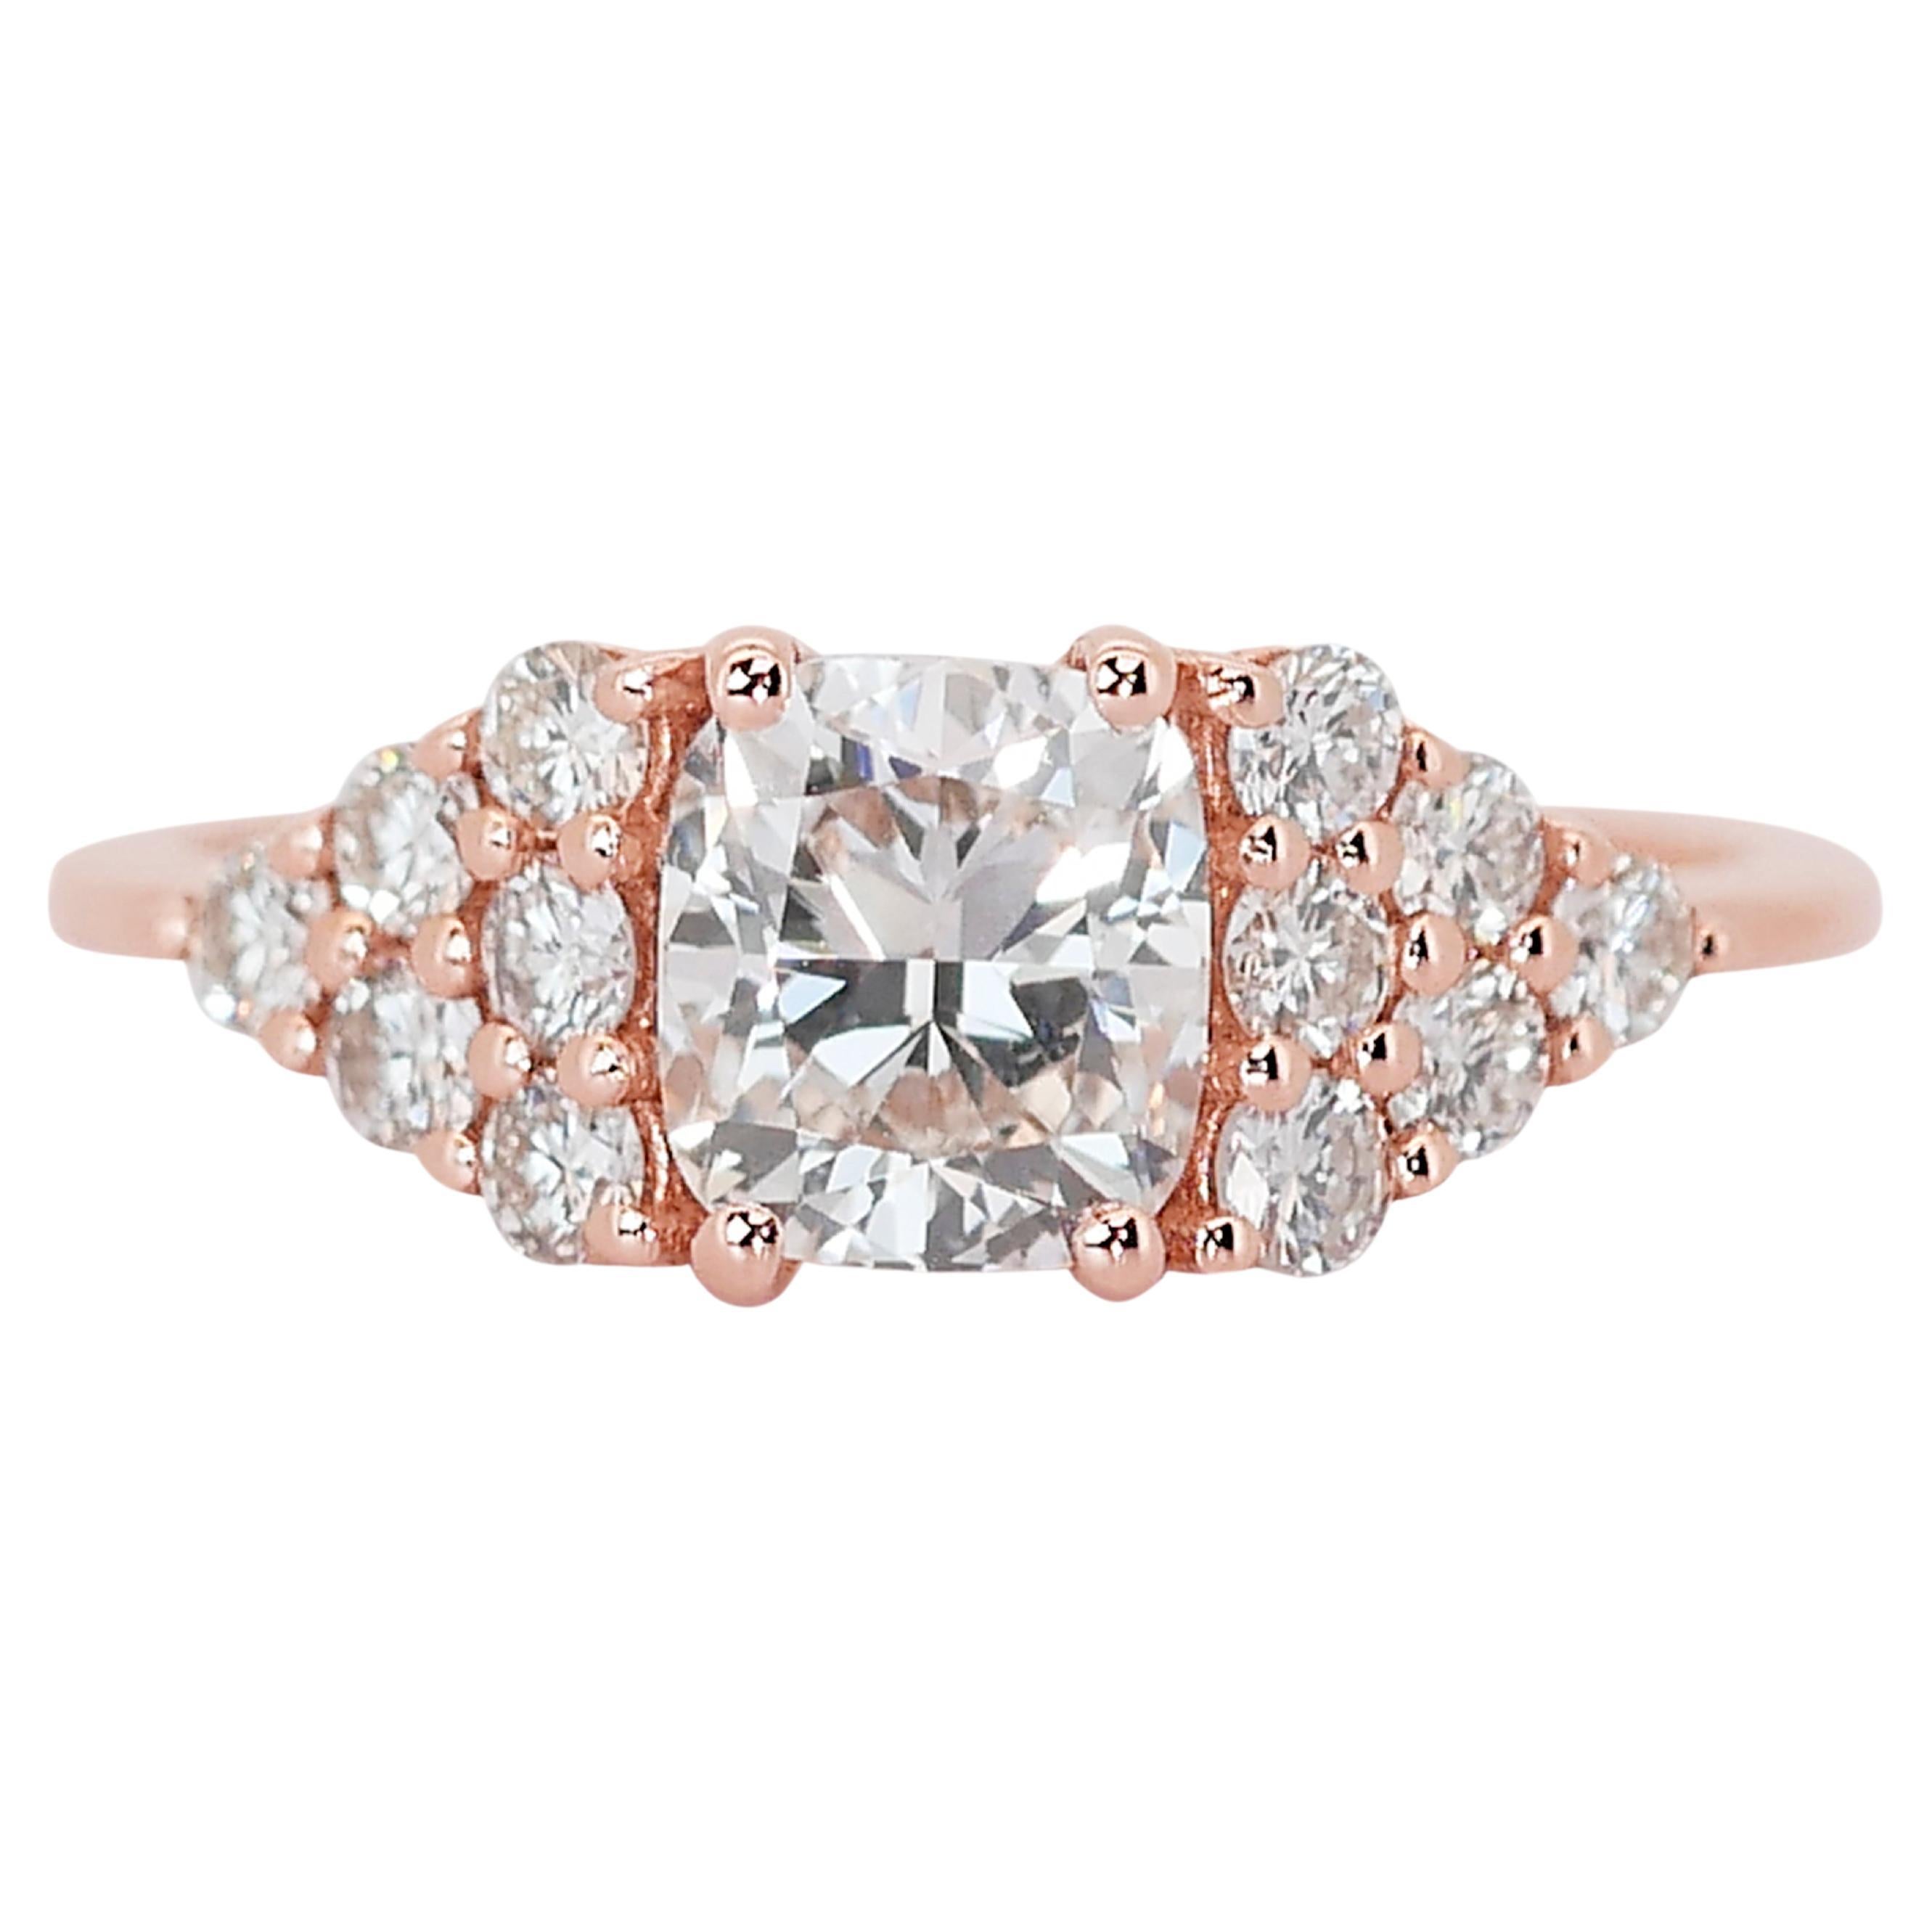 Lovely 1.65ct Diamonds Pave Ring in 14k Rose Gold - IGI Certified For Sale